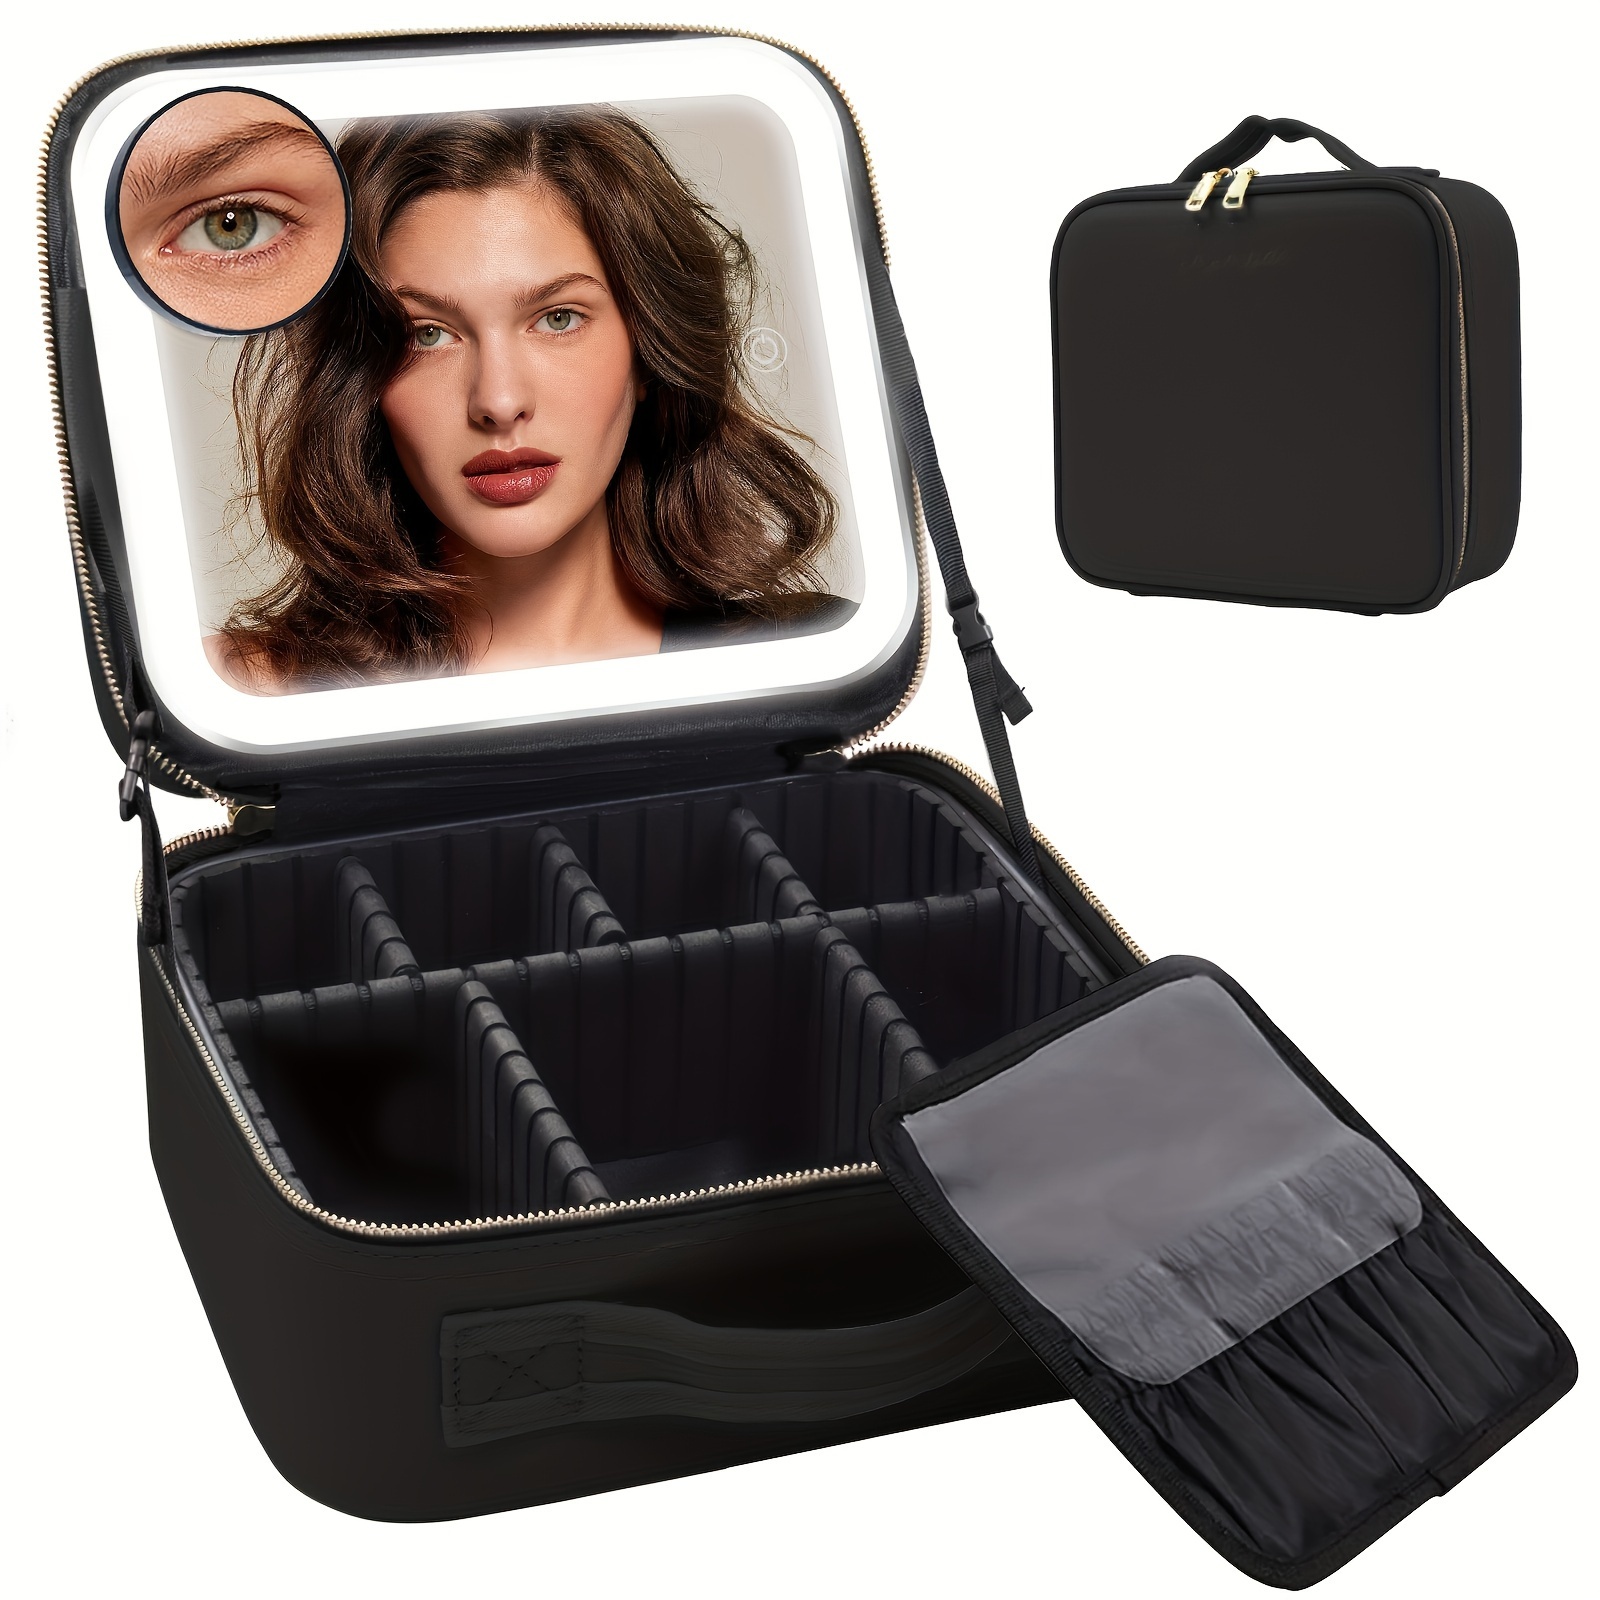 

Travel Makeup Bag With Led Mirror, Portable Professional Cosmetic Bag, Makeup Train Case With Adjustable Dividers